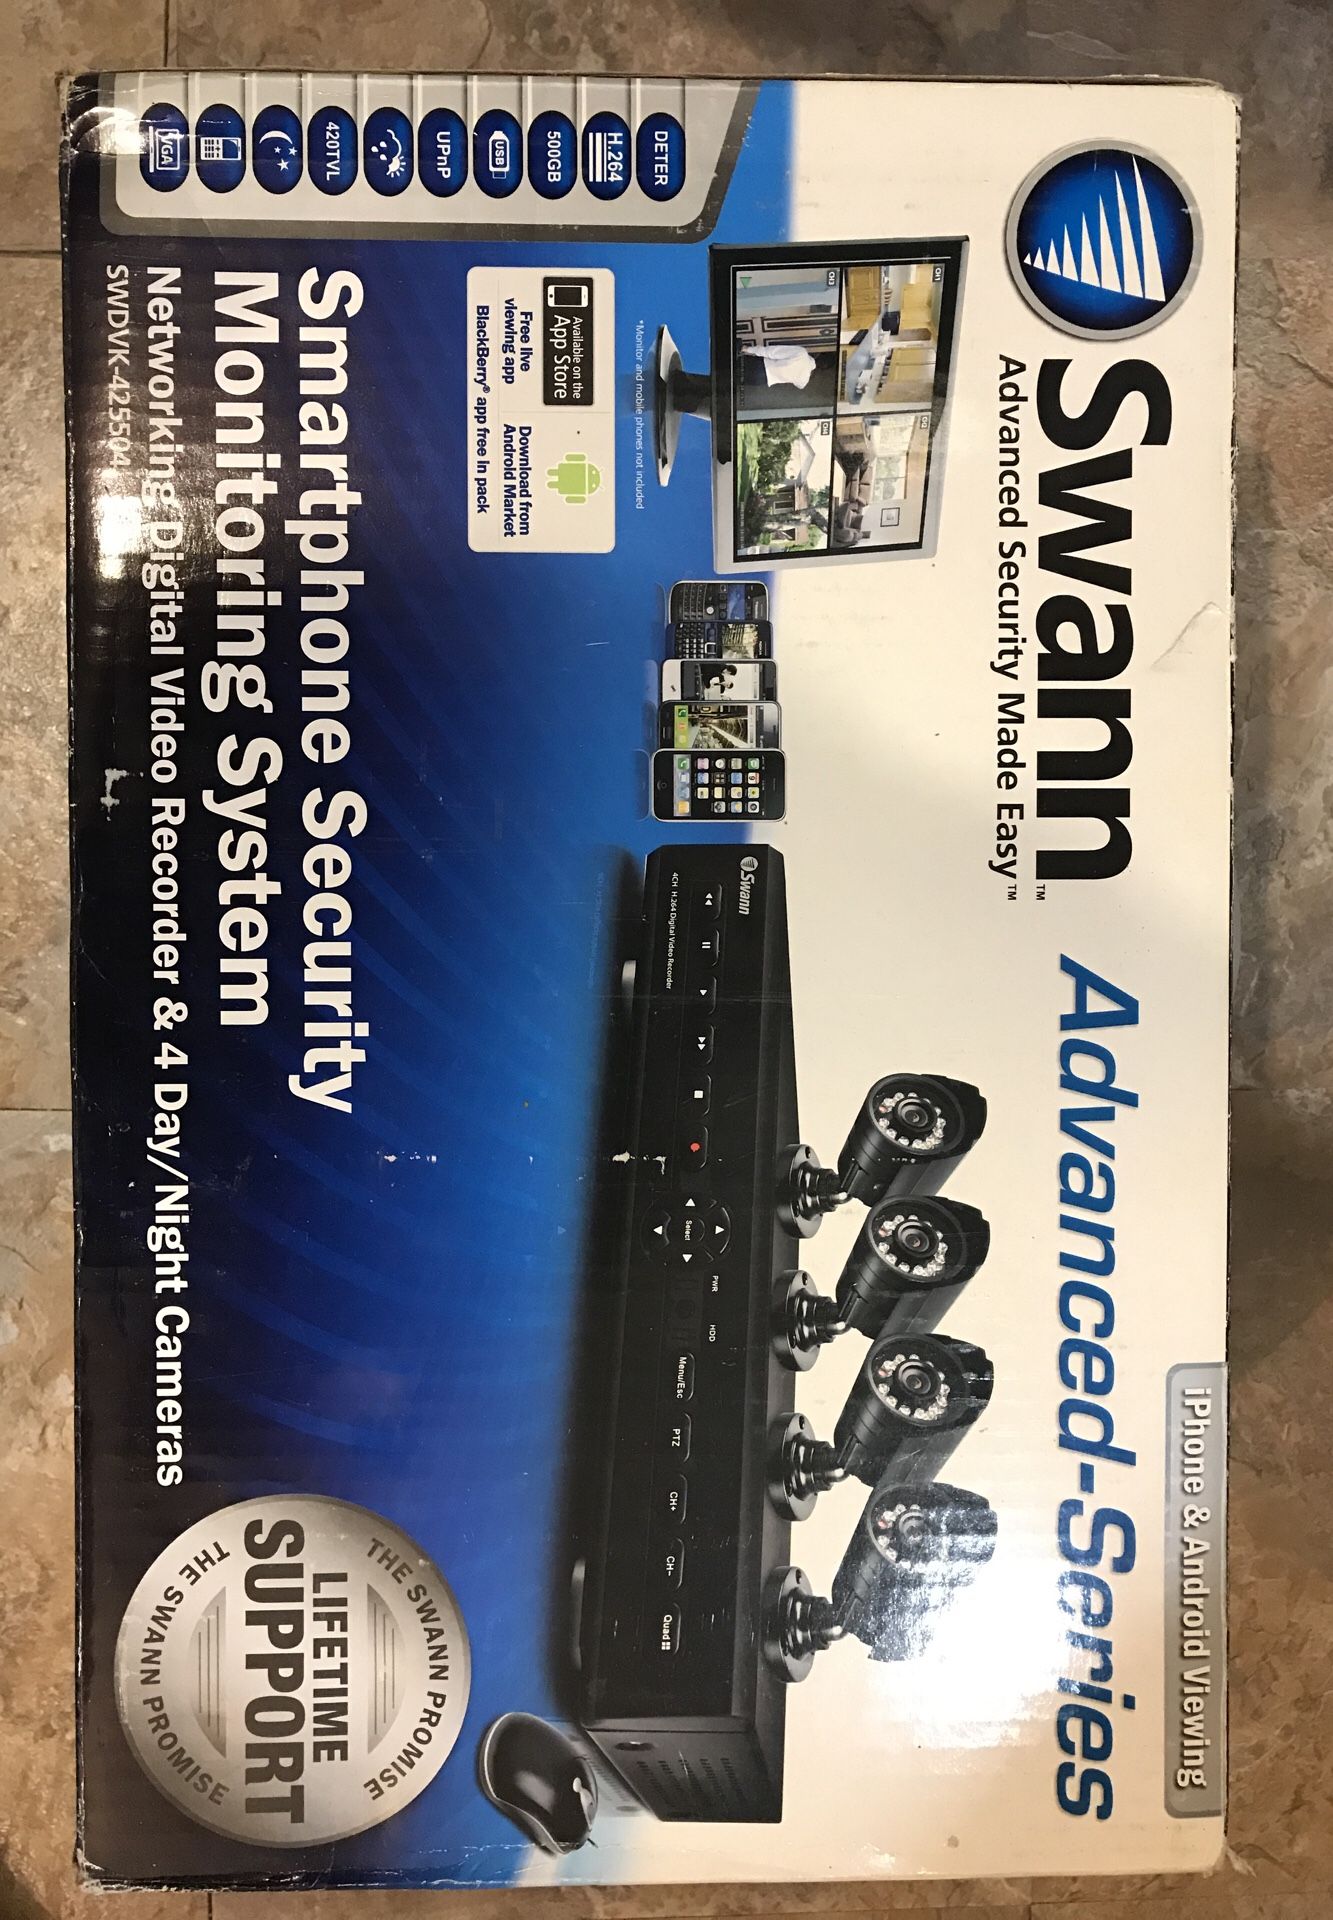 Swann Advanced-Series Security System (4 cameras)